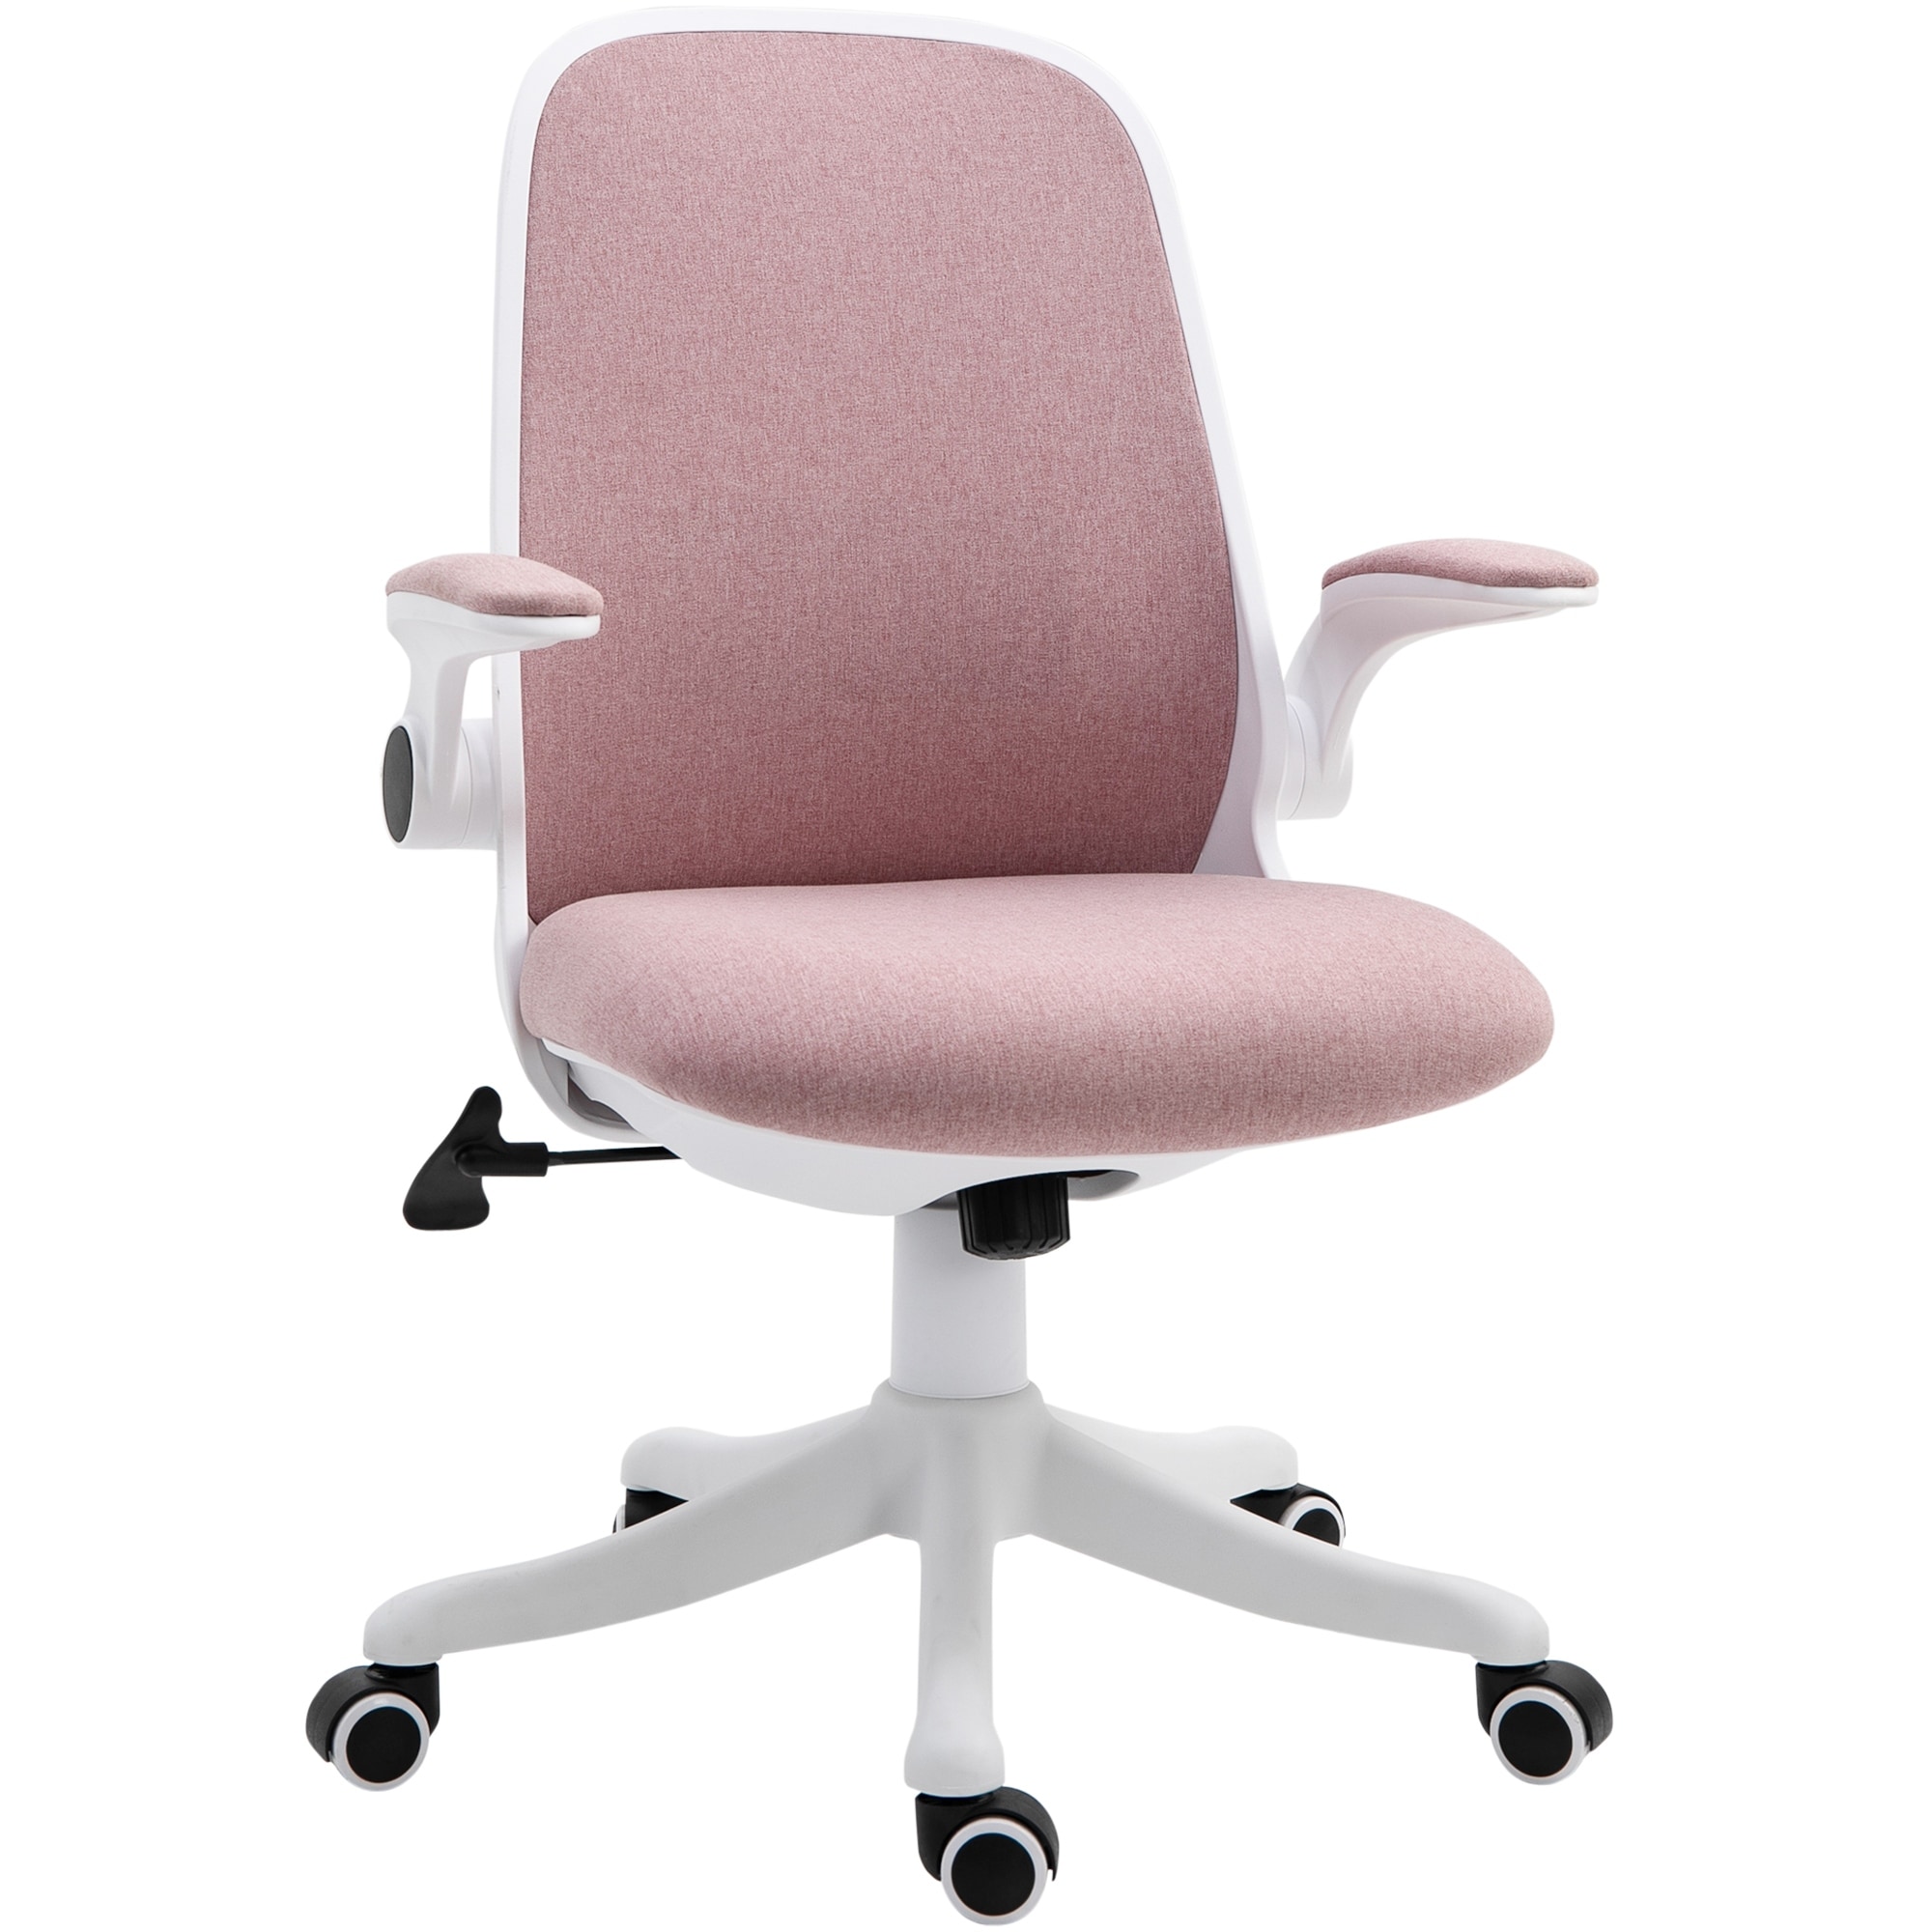 Details about   360 Rotation Ergonomic Adjustable Office Chair Liftable Computer Network Chair 